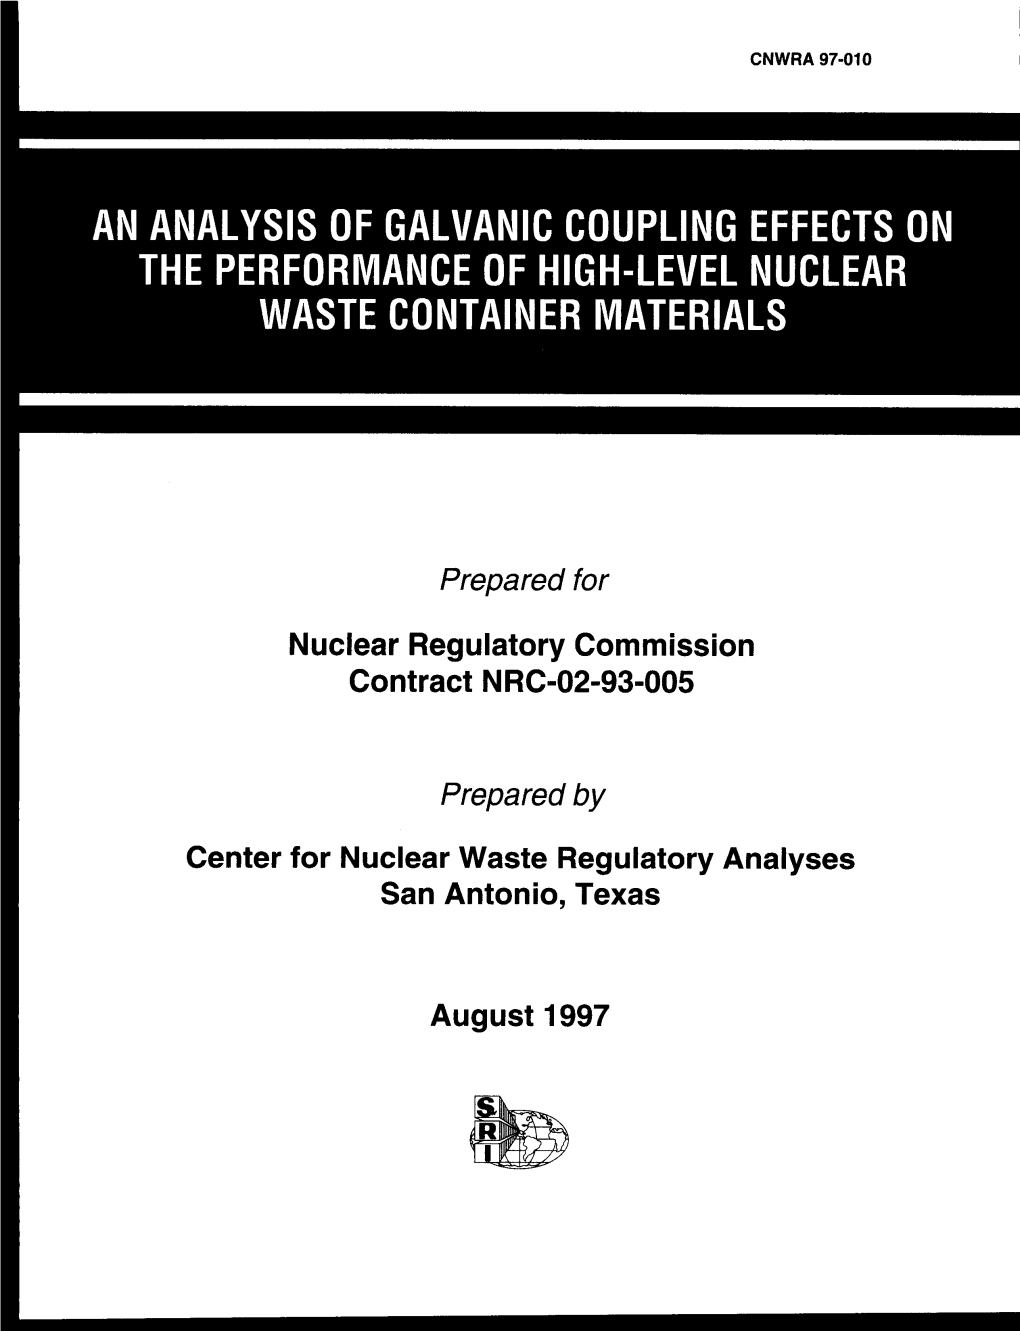 An Analysis of Galvanic Coupling Effects on the Performance of High-Level Nuclear Waste Container Materials